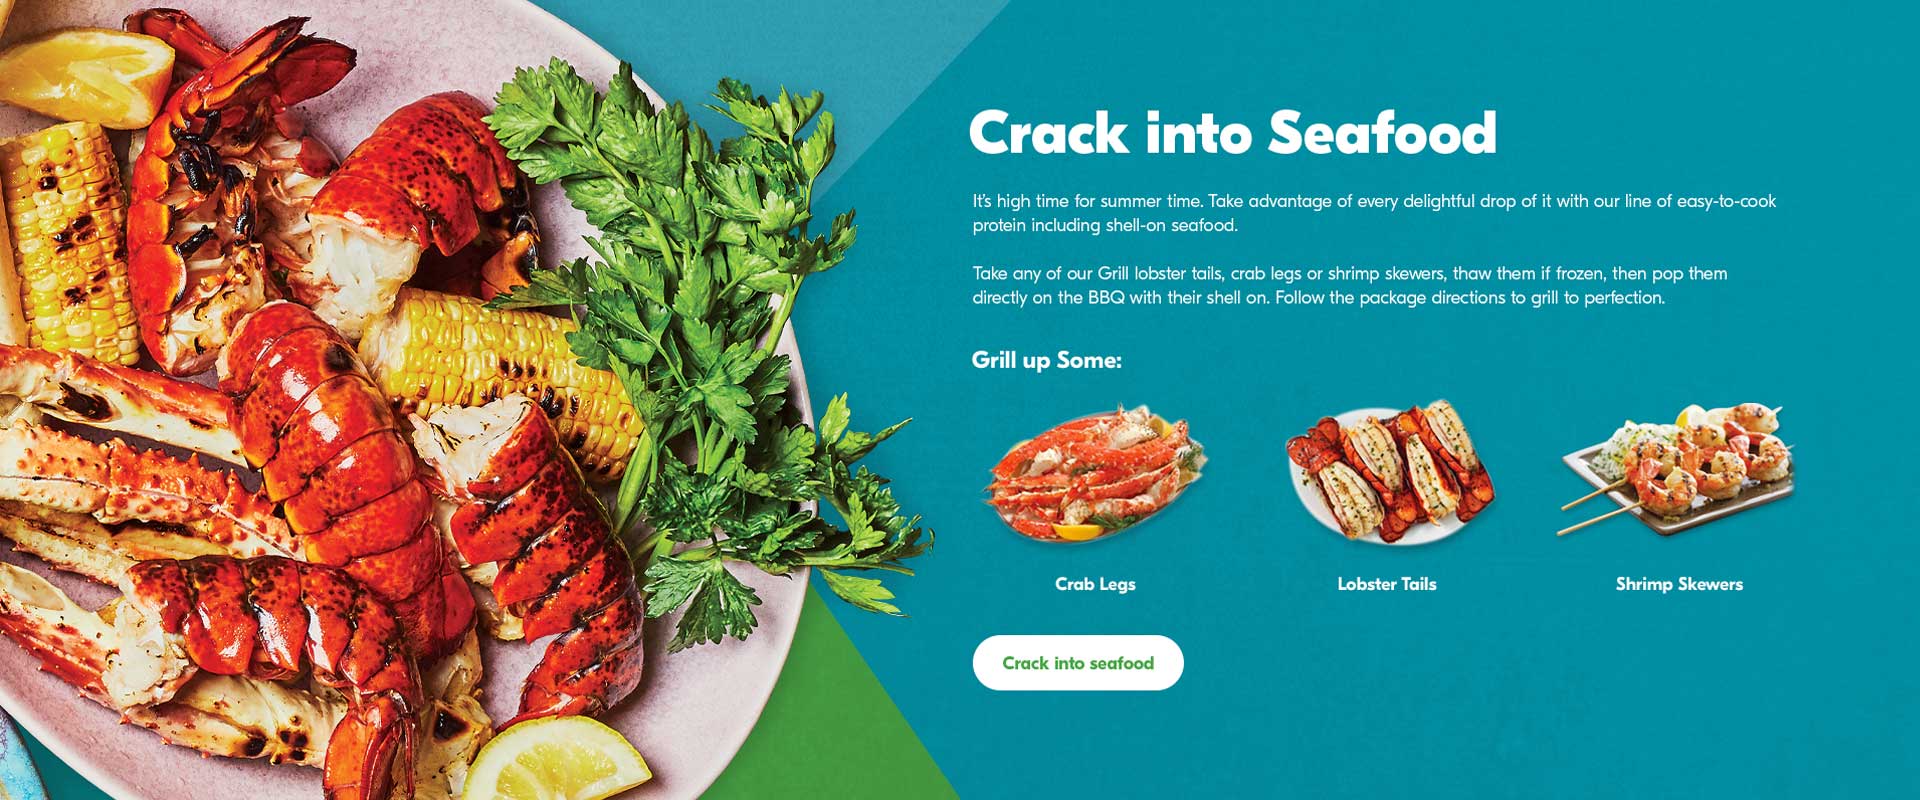 Crack into Seafood